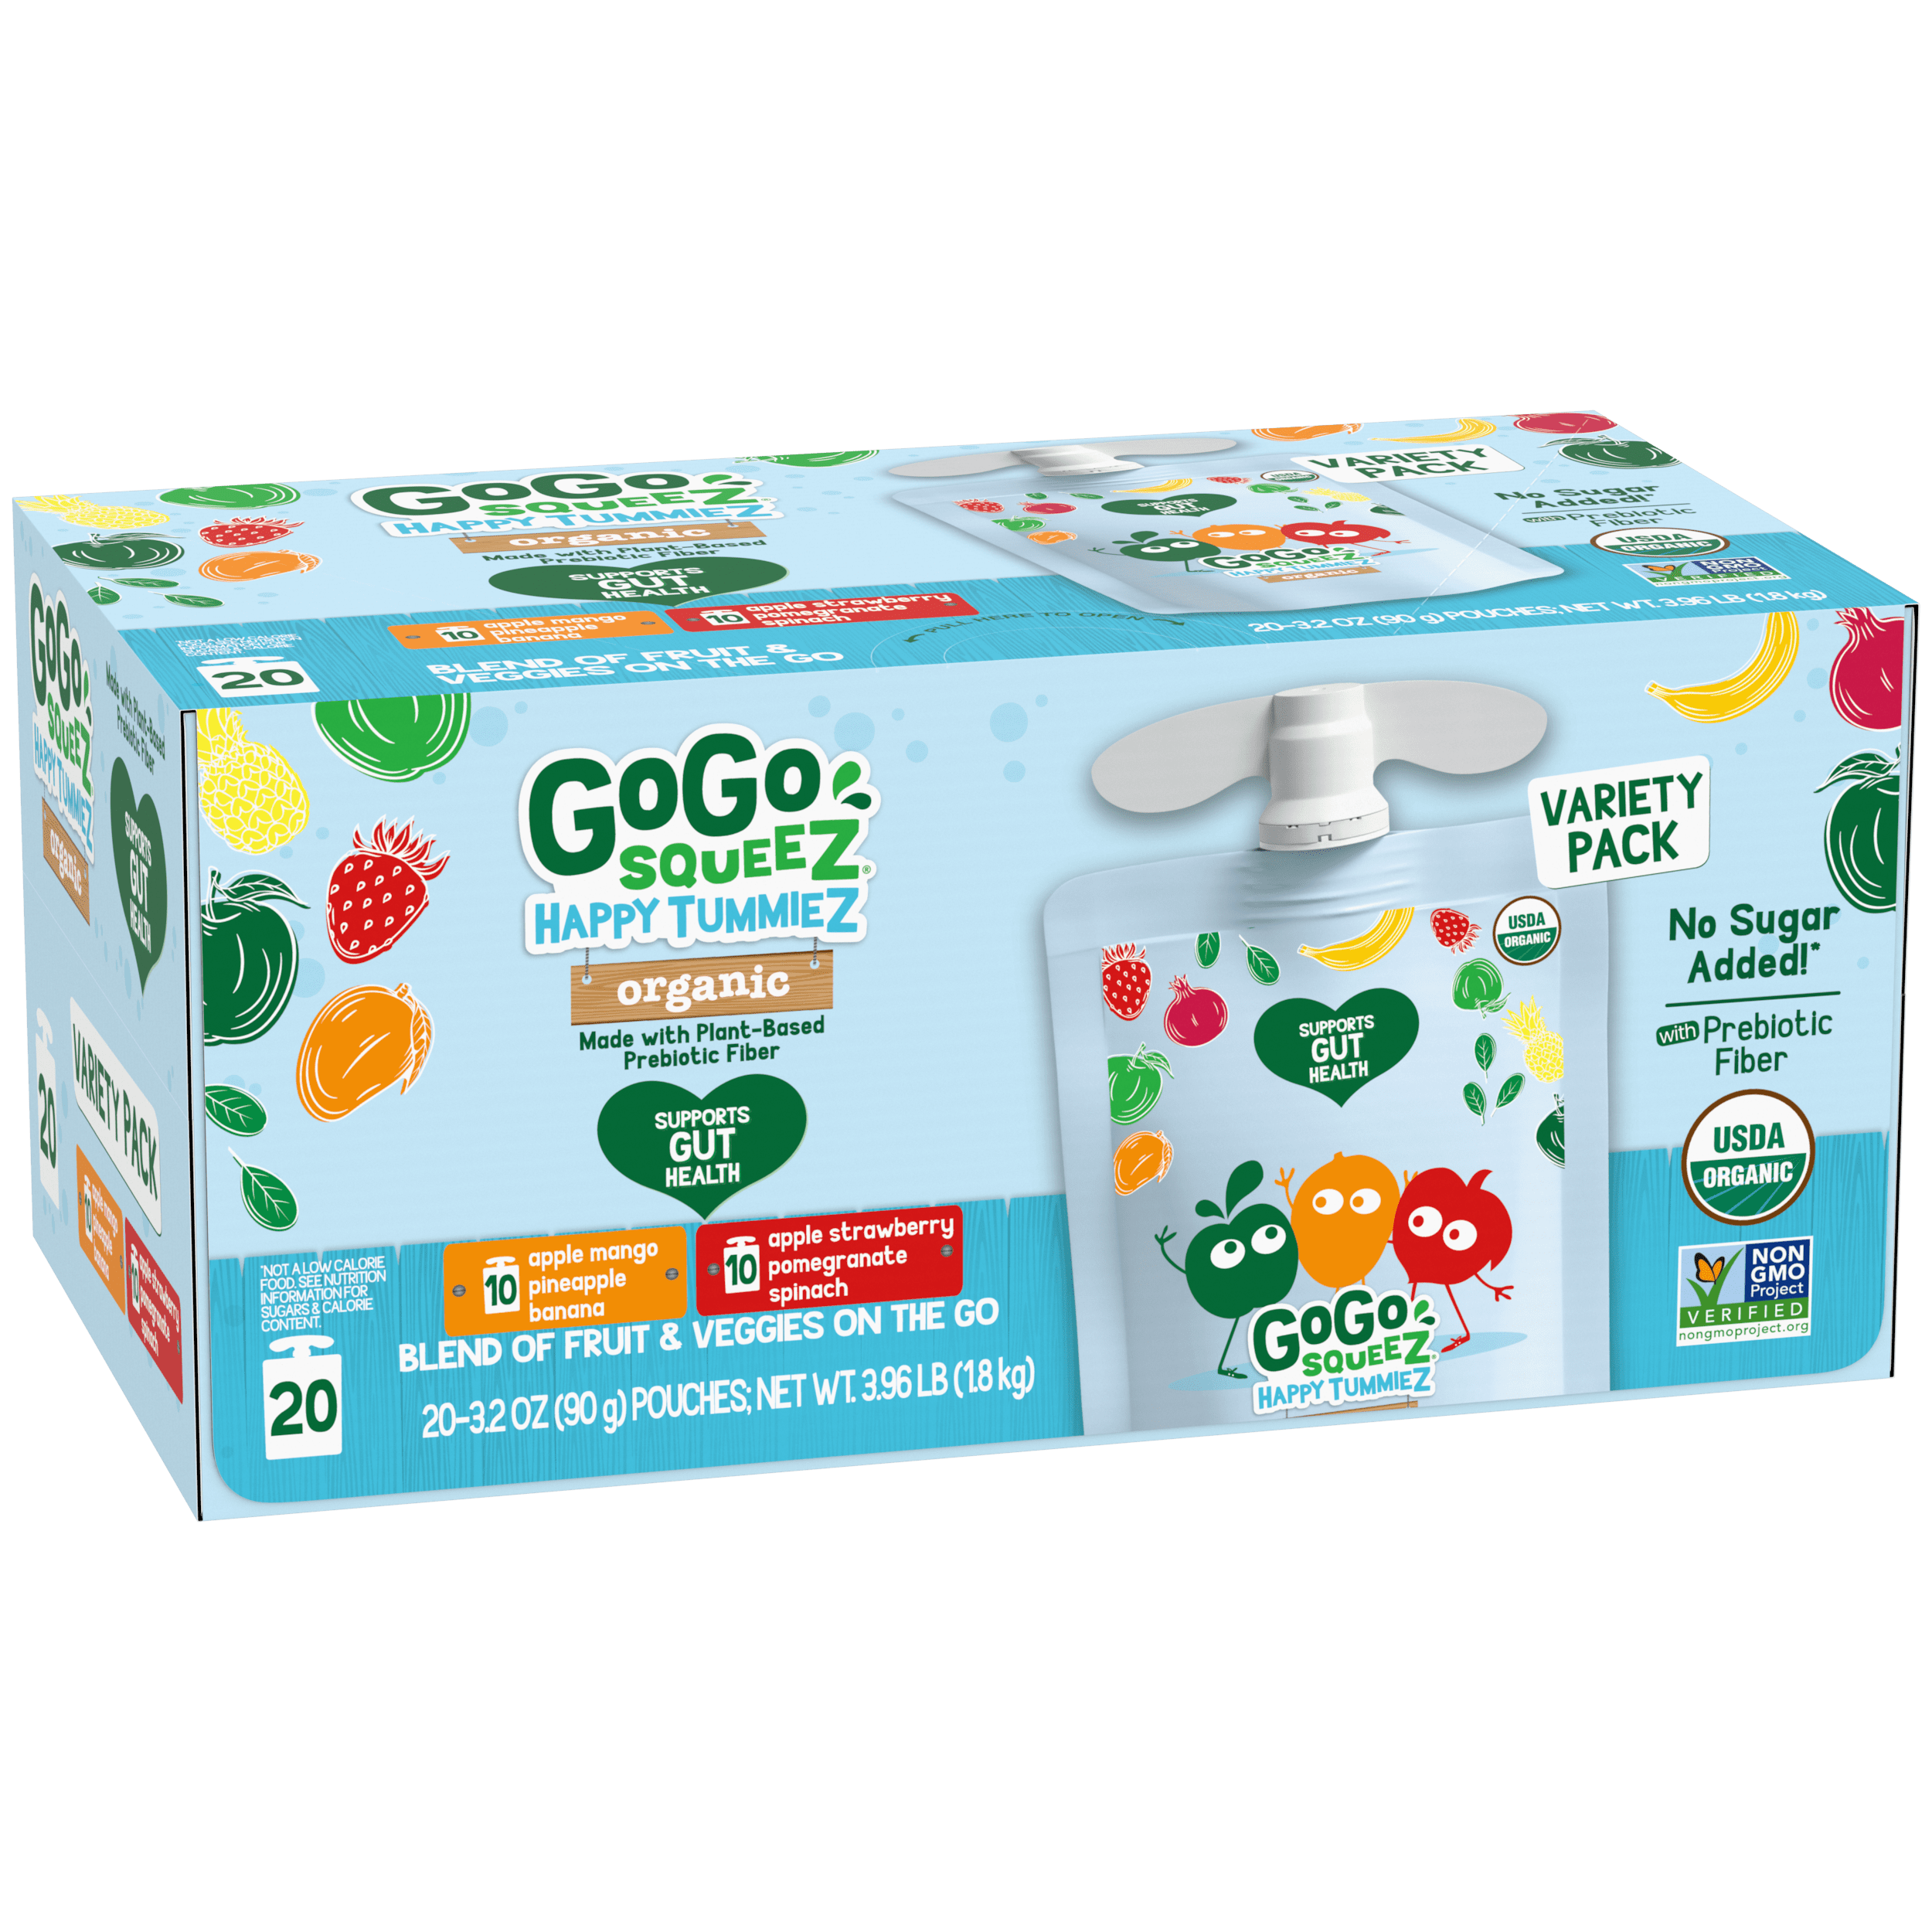 Gogo Squeez Pouches Happy tummieZ Organic Apple Mango Pineapple Banana; Apple Strawberry Pomegranate Spinach 20 Pack Variety Pack Box